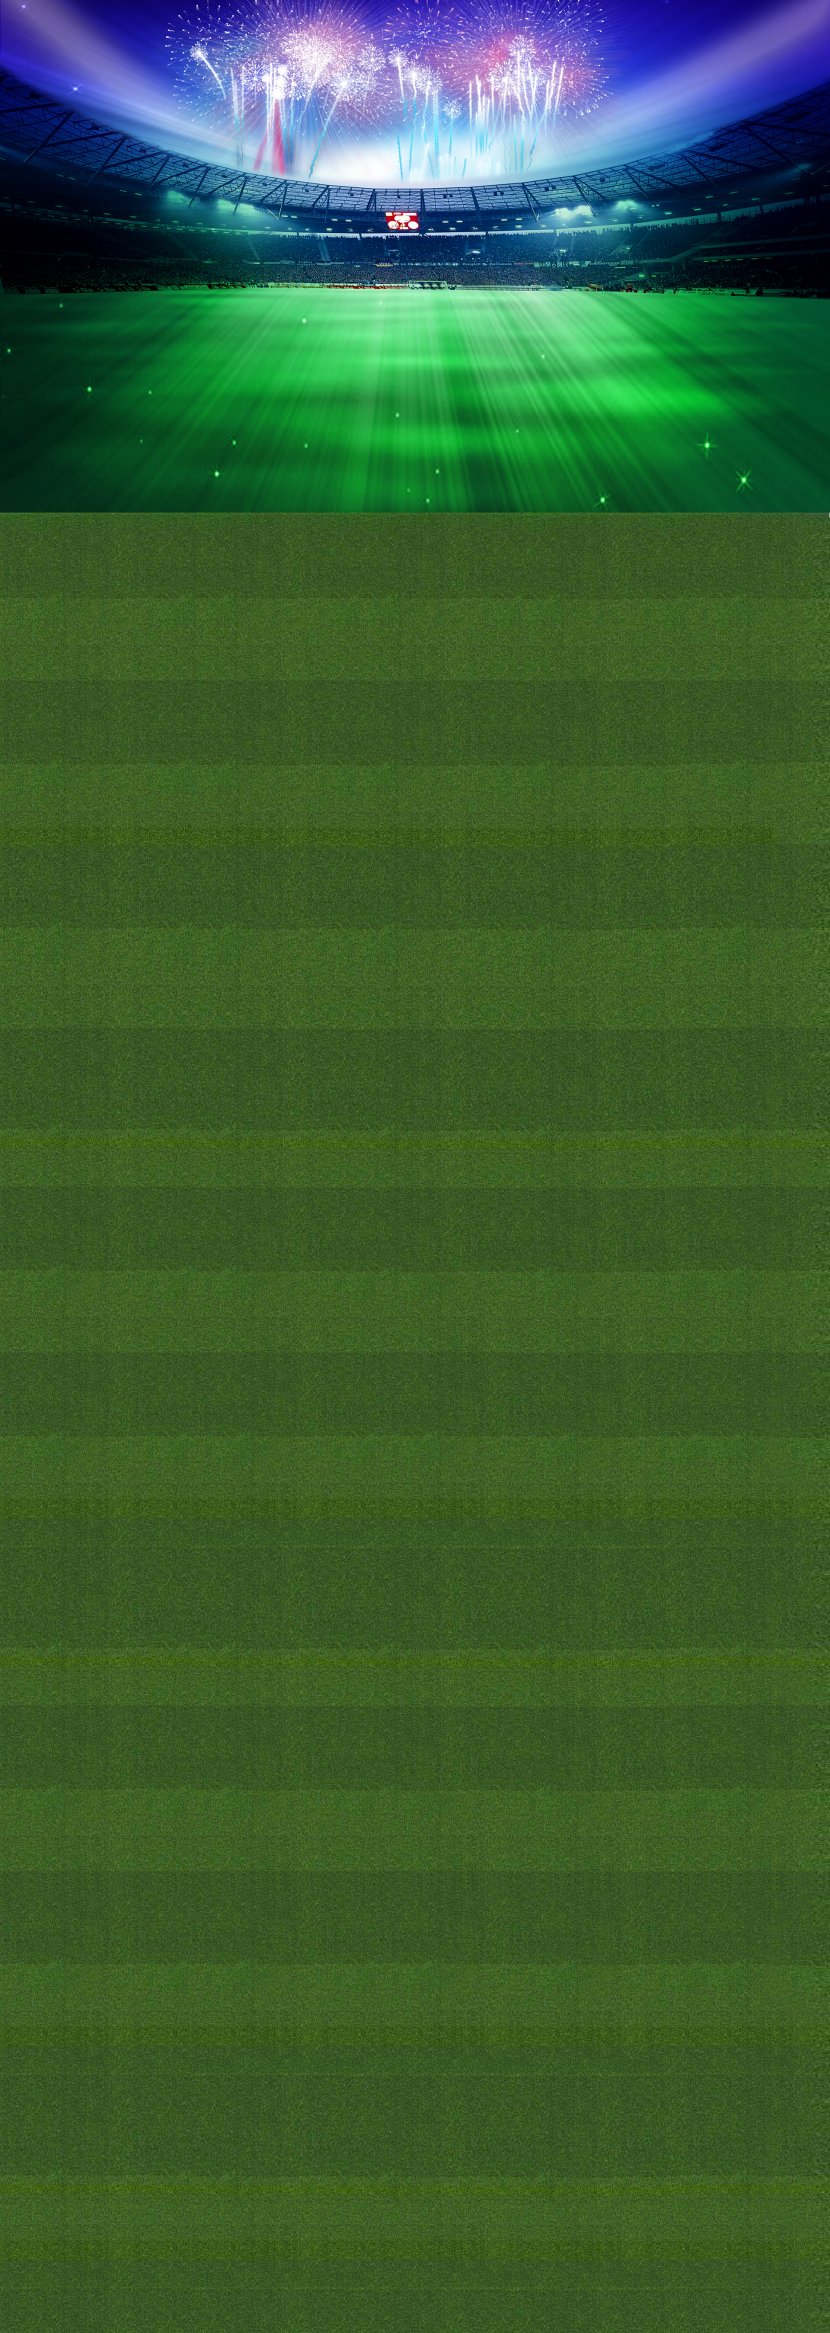 Atmosphere Sky Lawn Green Wallpaper - Meadow - Snacks Sports Equipment Background Transparent PNG